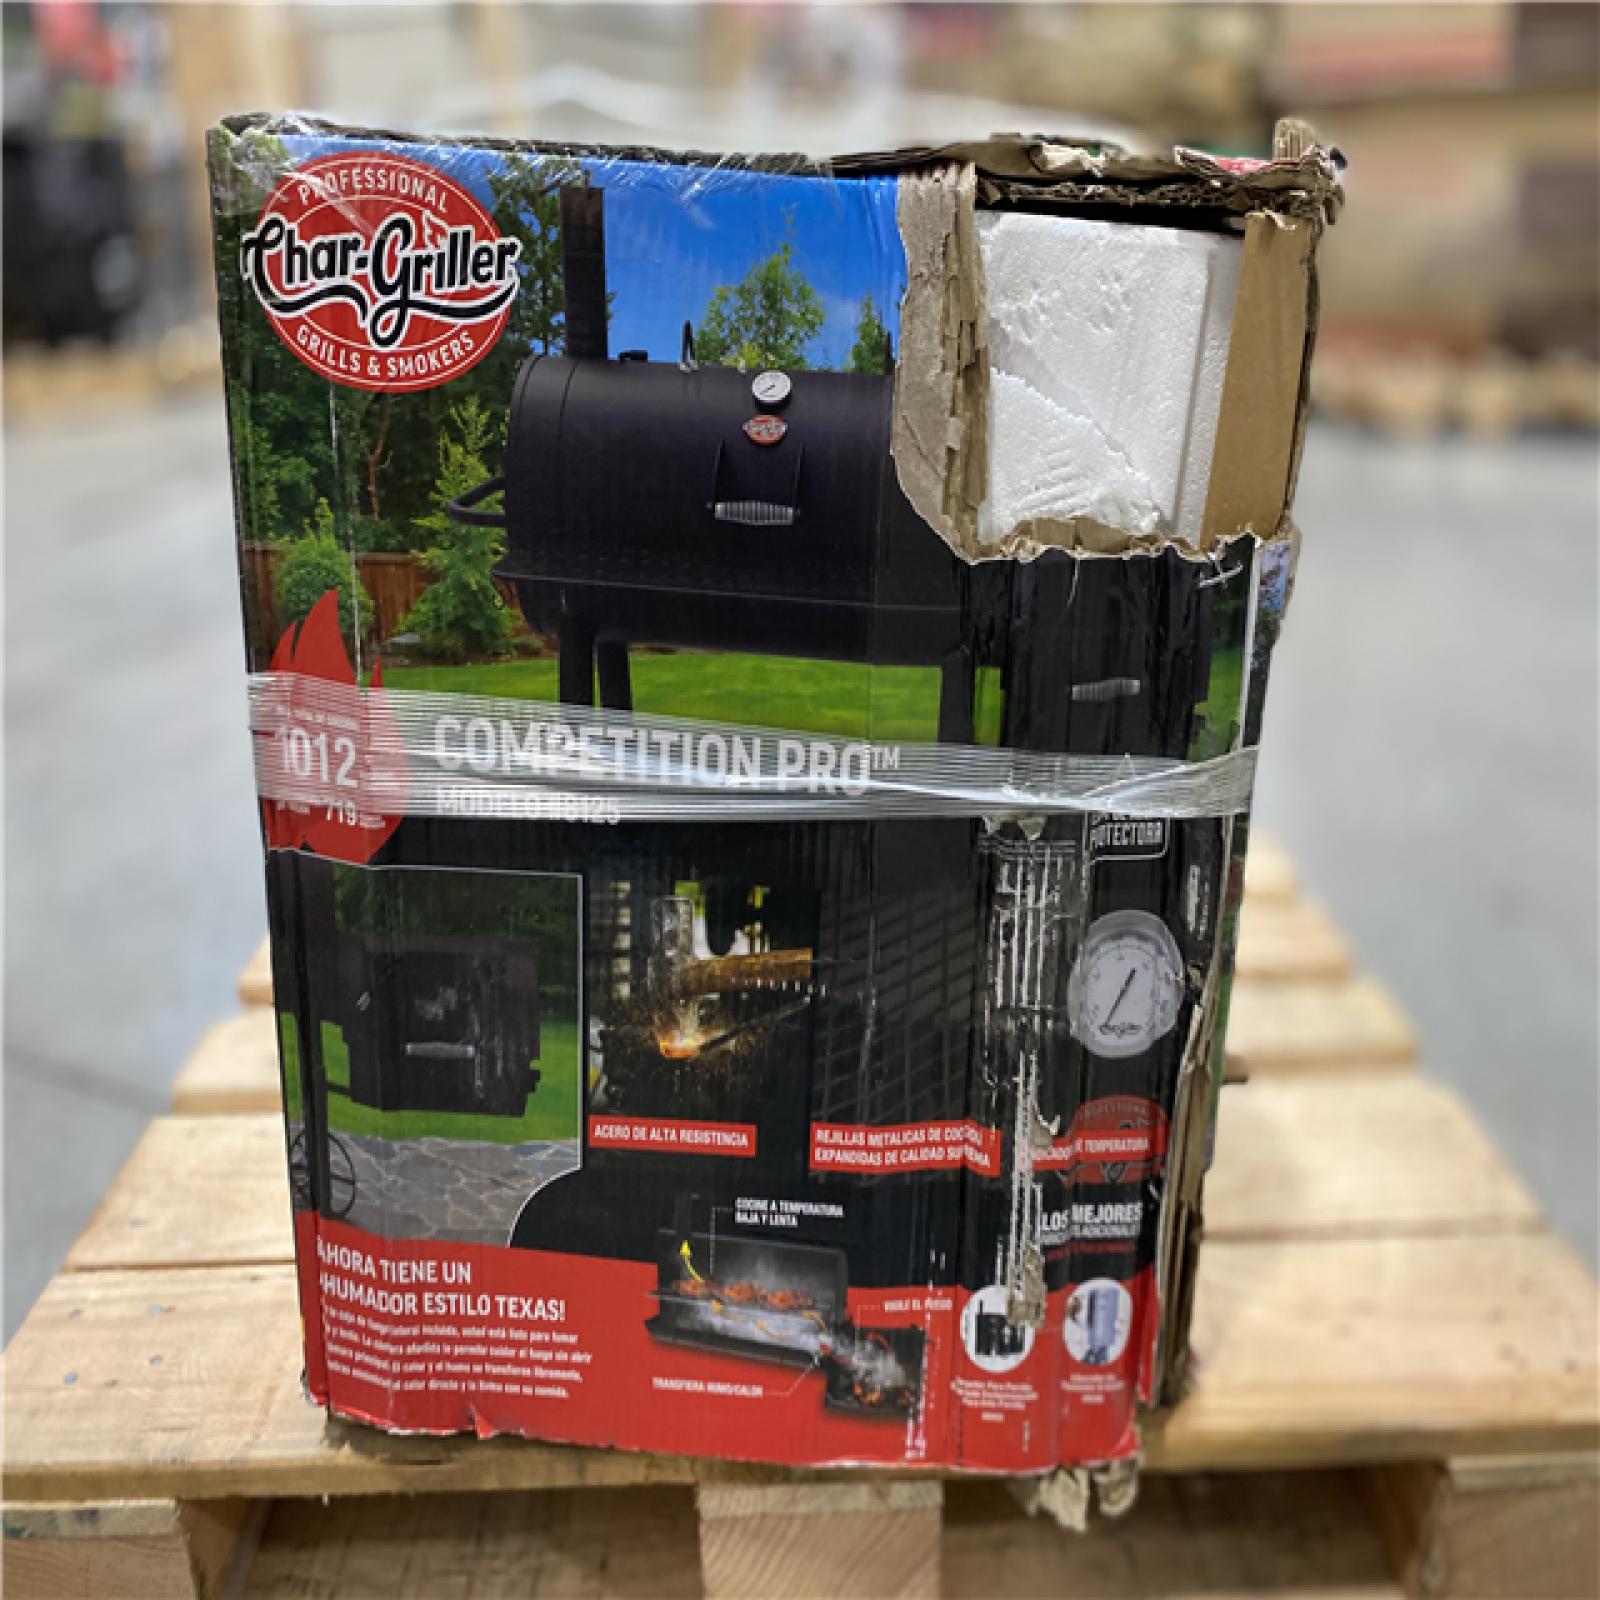 DALLAS LOCATION - Char-Griller 1012 sq. in. Competition Pro Offset Charcoal Grill or Wood Smoker in Black